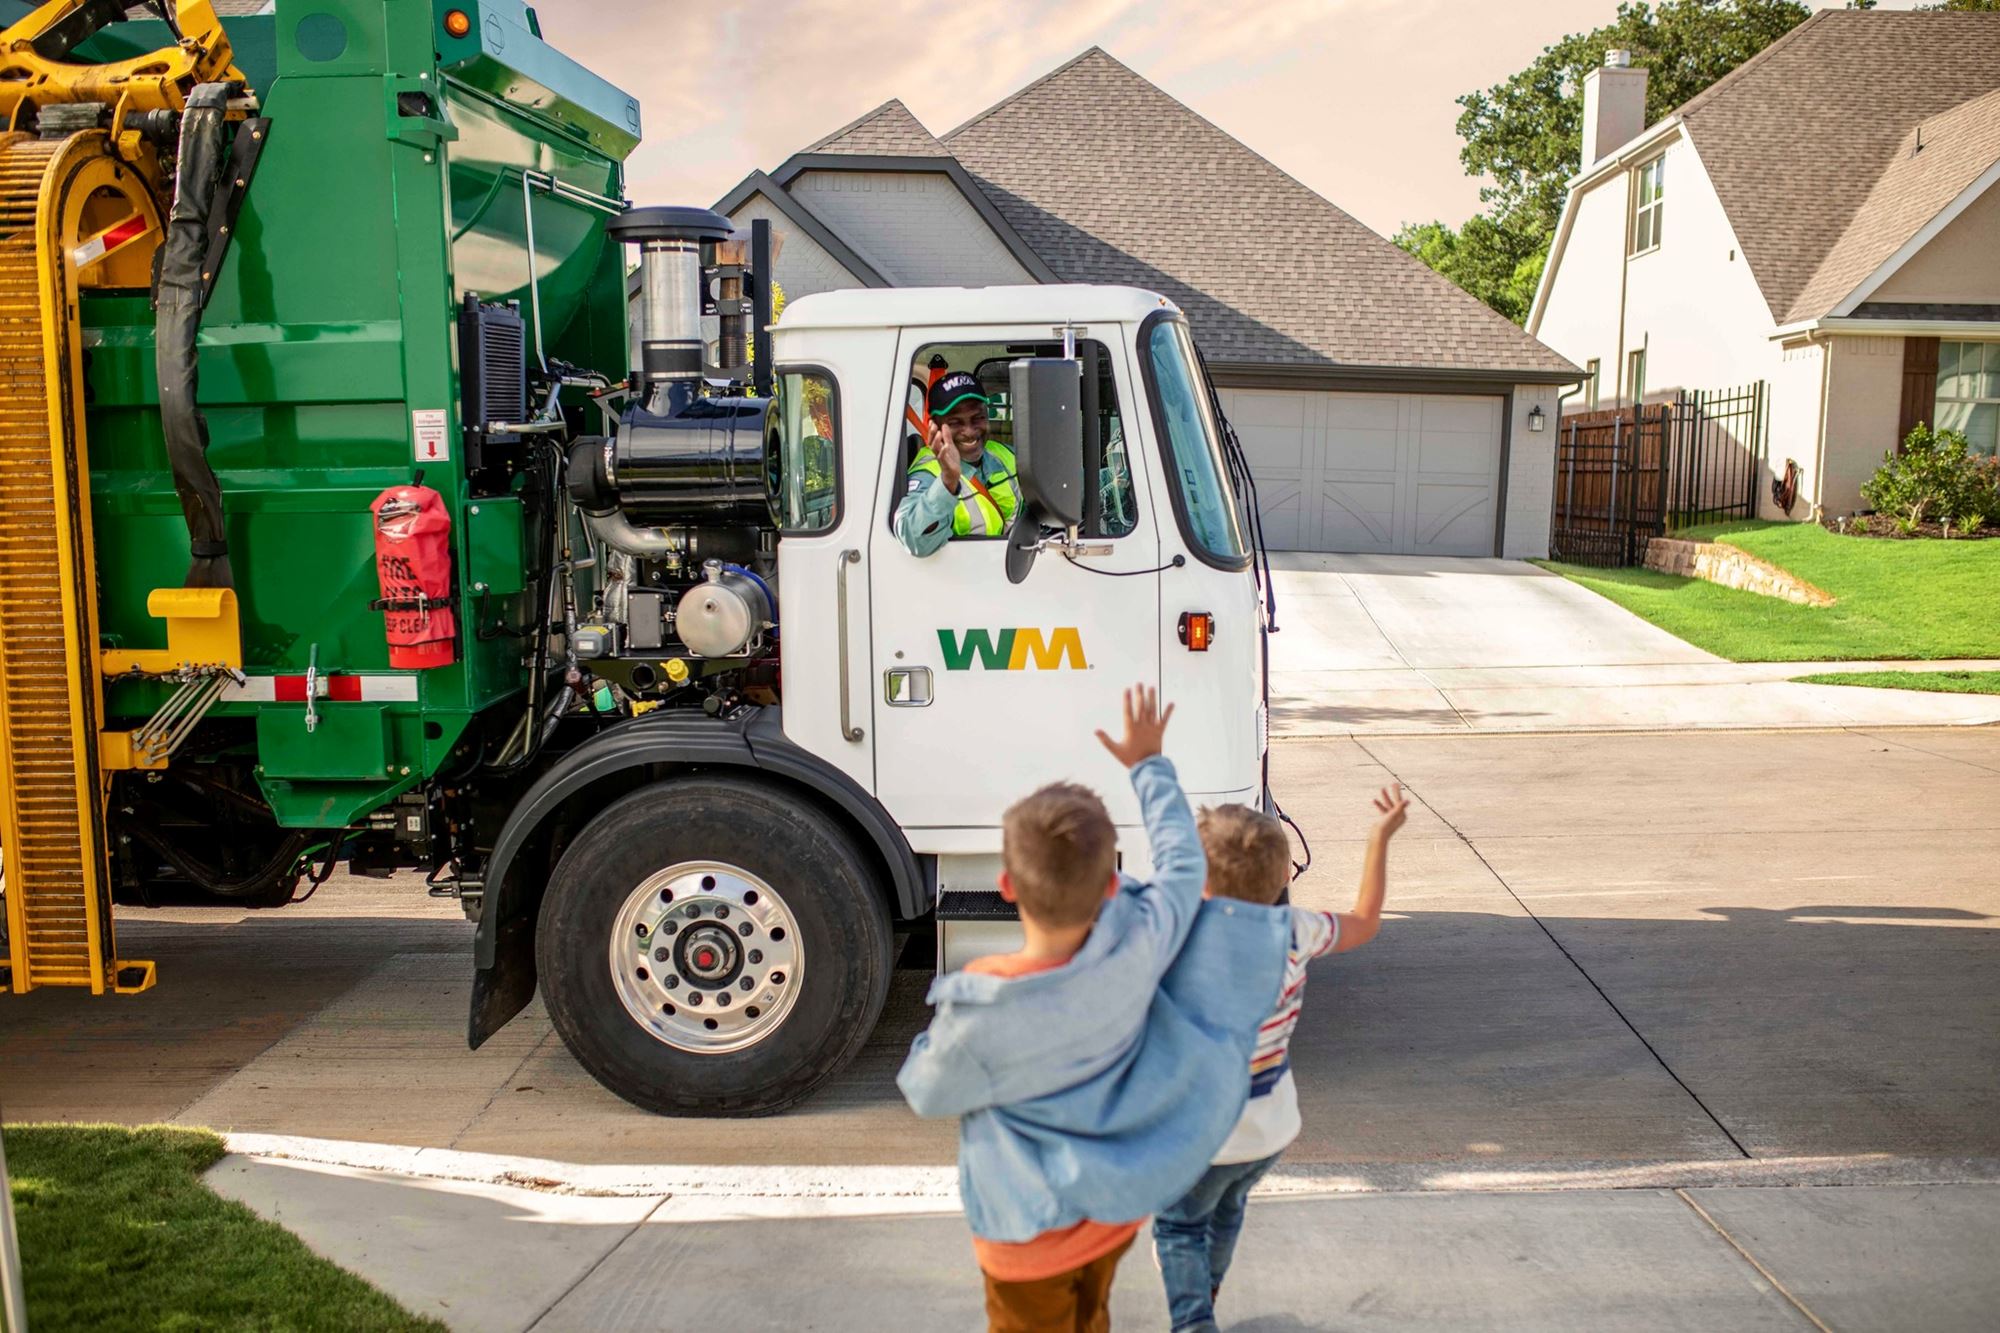 Garbage truck with 2 children waving at it.